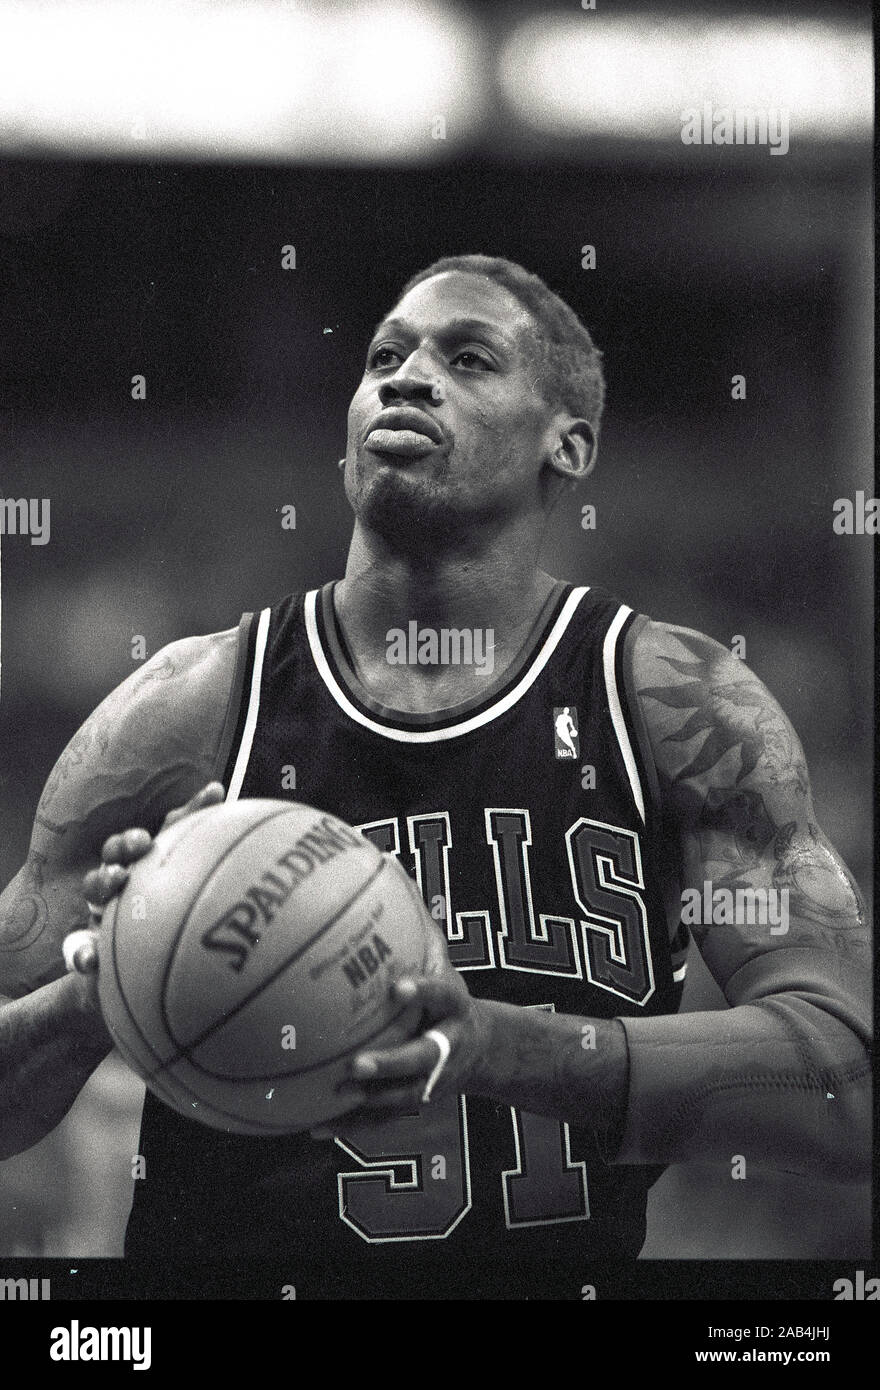 It's like being blackballed” — Dennis Rodman on his falling out